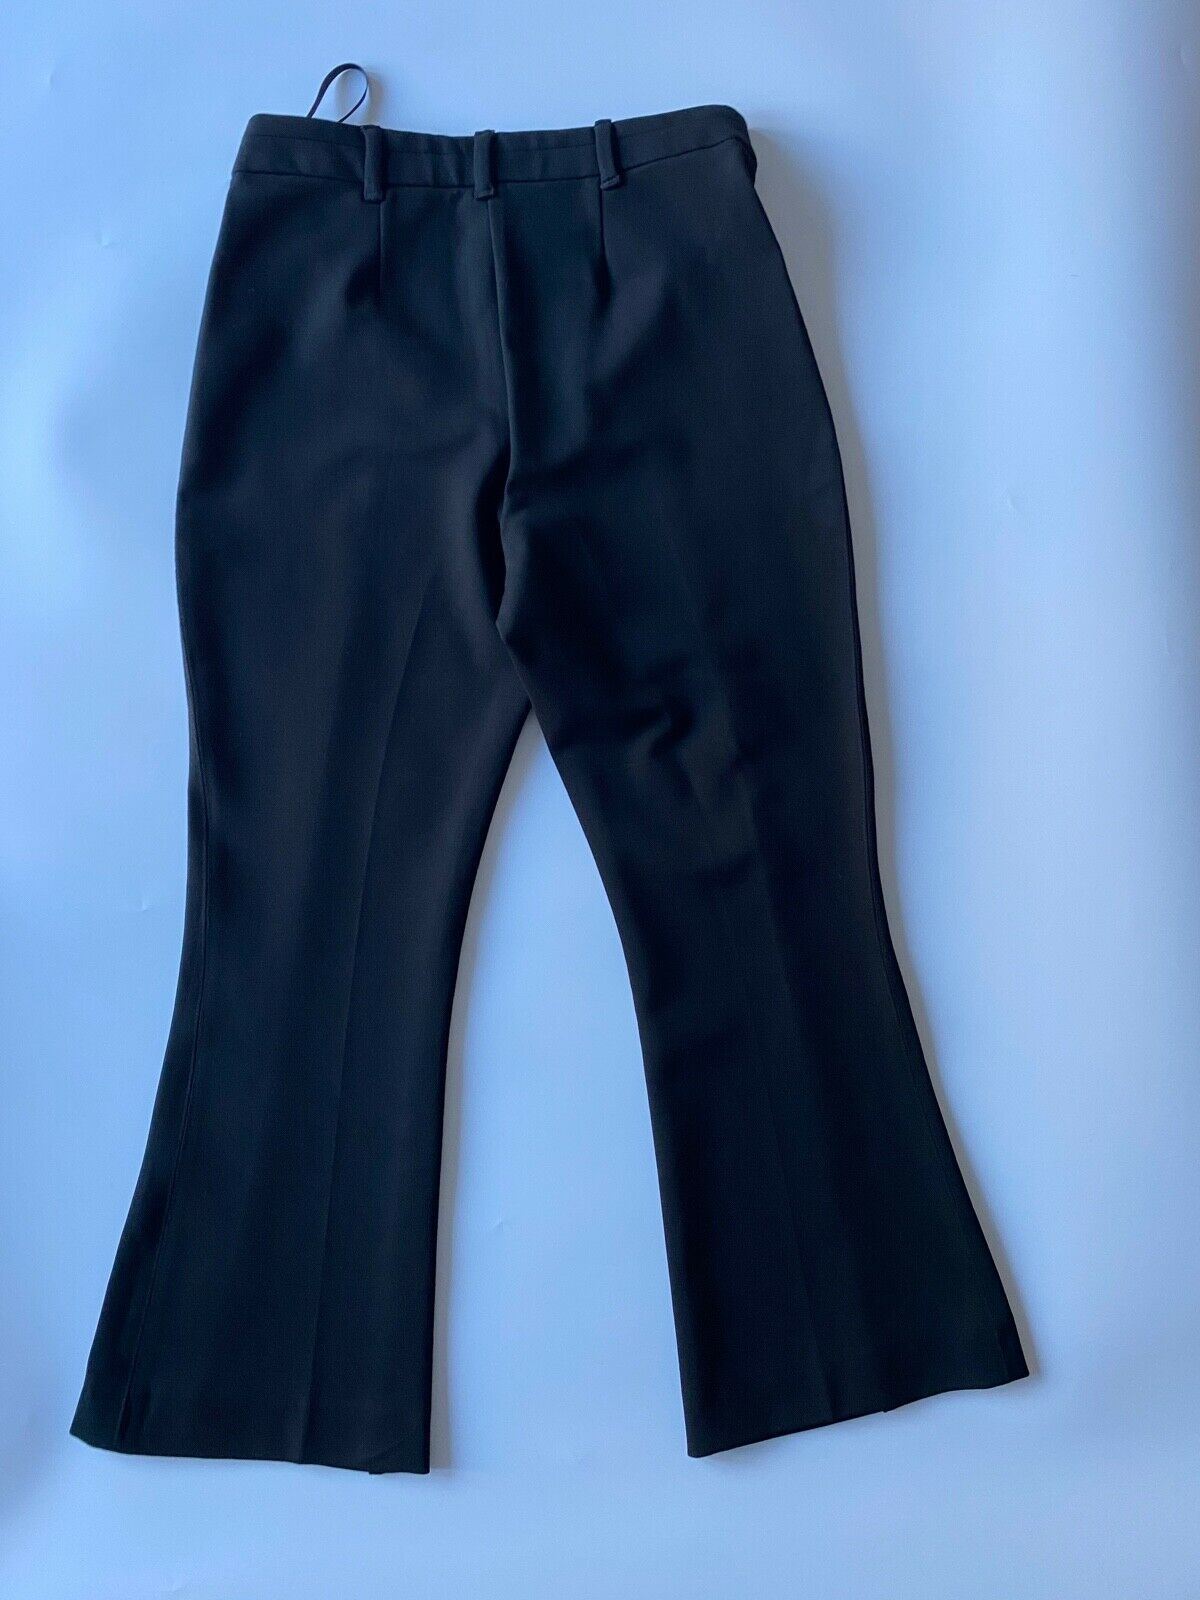 River Island Black Bootcut Crop Tailored Trousers Size 8 L24"